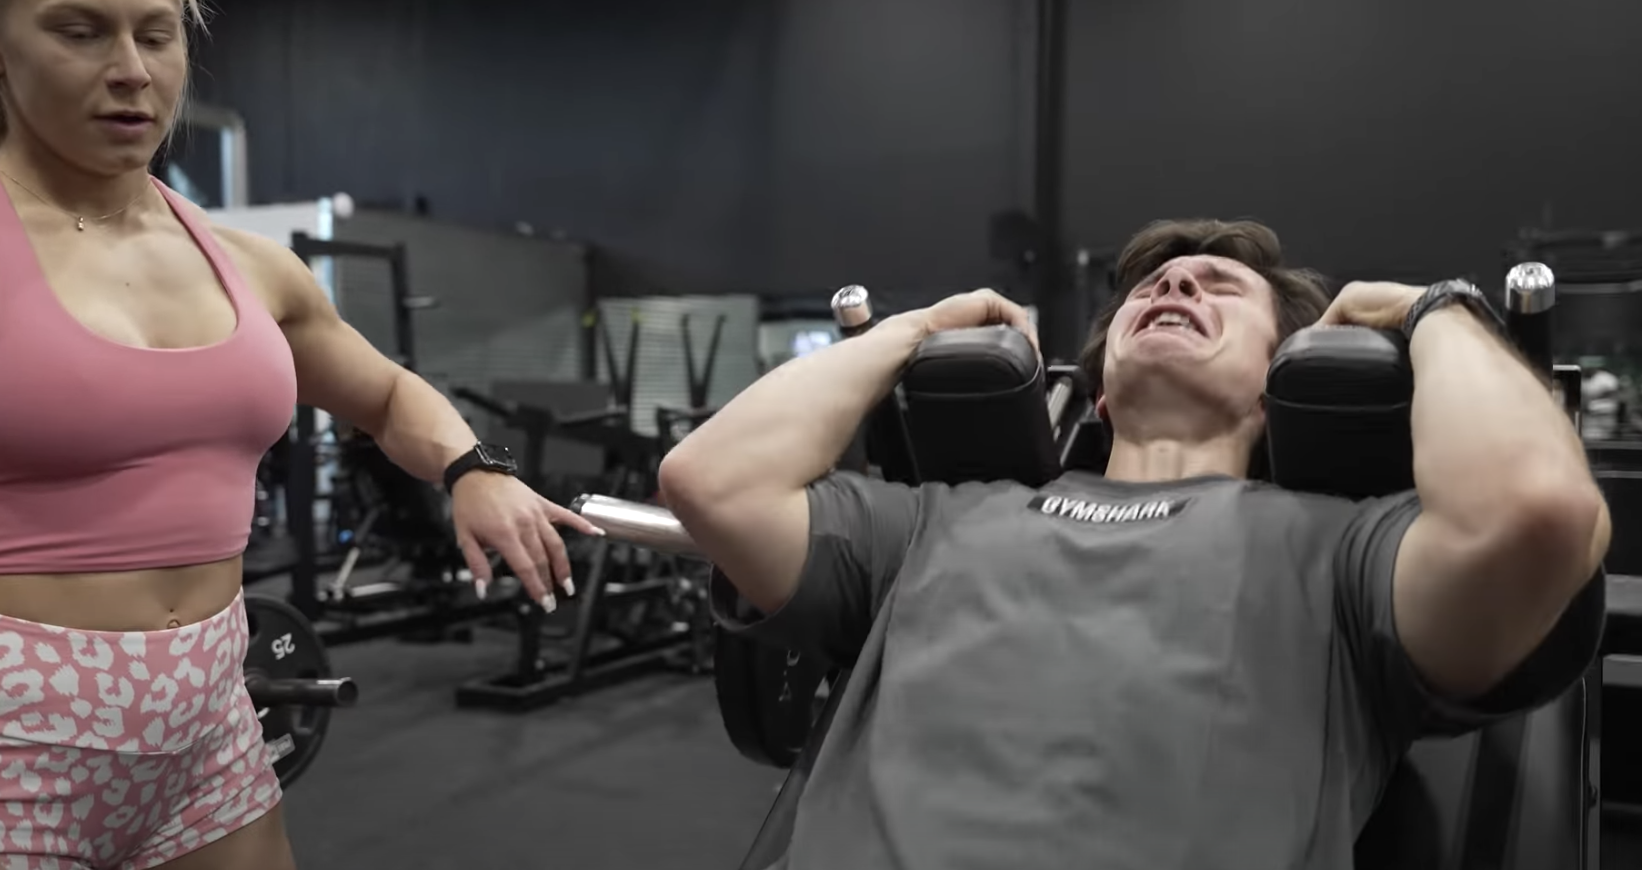 Watch This Guy Try a Pro Woman Bodybuilder's Leg Day Workout